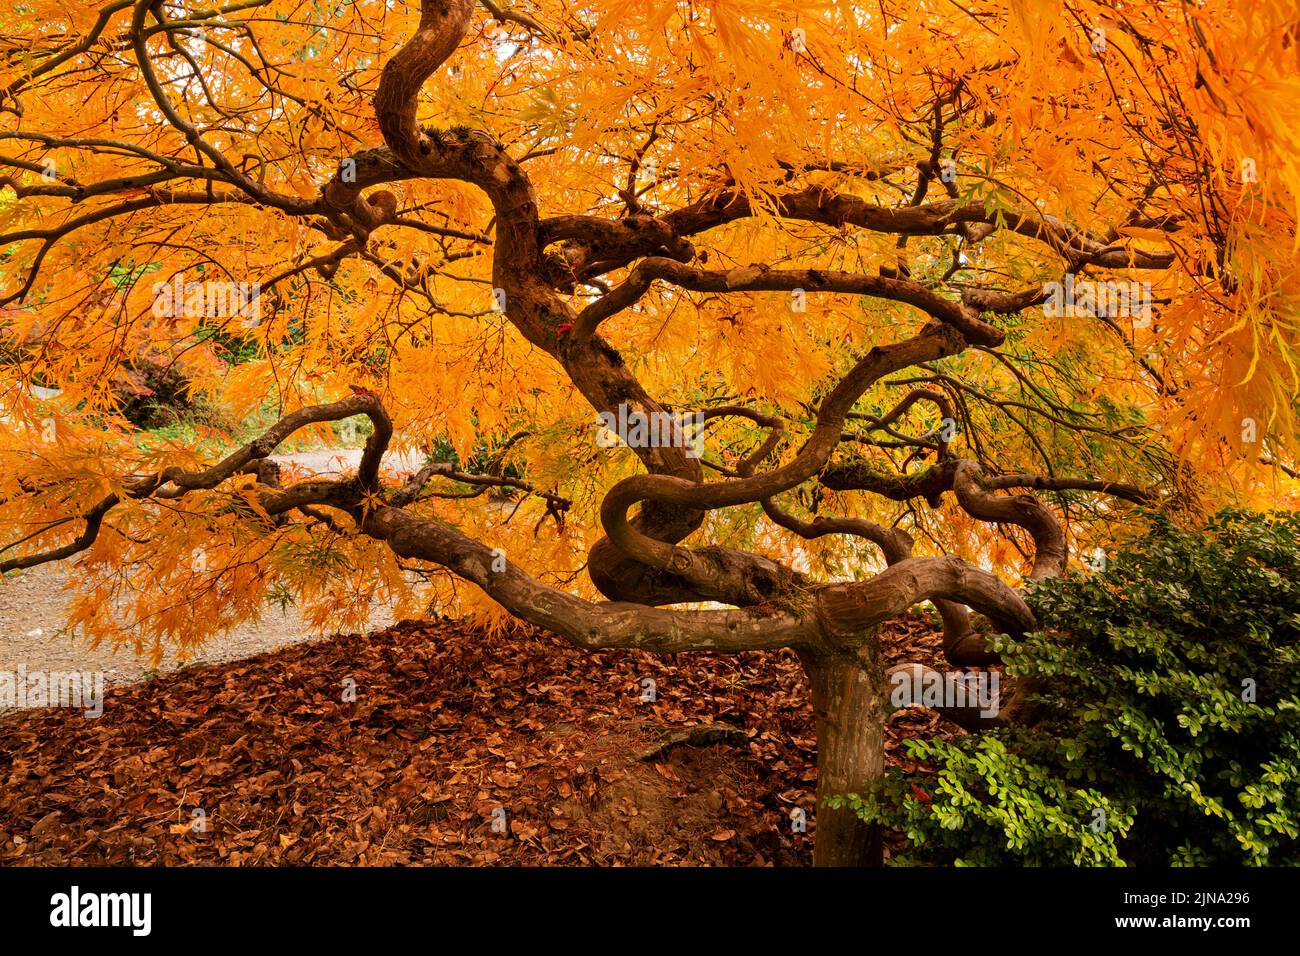 WA21854-00...WASHINGTON - Twisted and bent branches of a Japanese maple in brilliant fall color at Kubota Gardens; a Seattle city park. Stock Photo